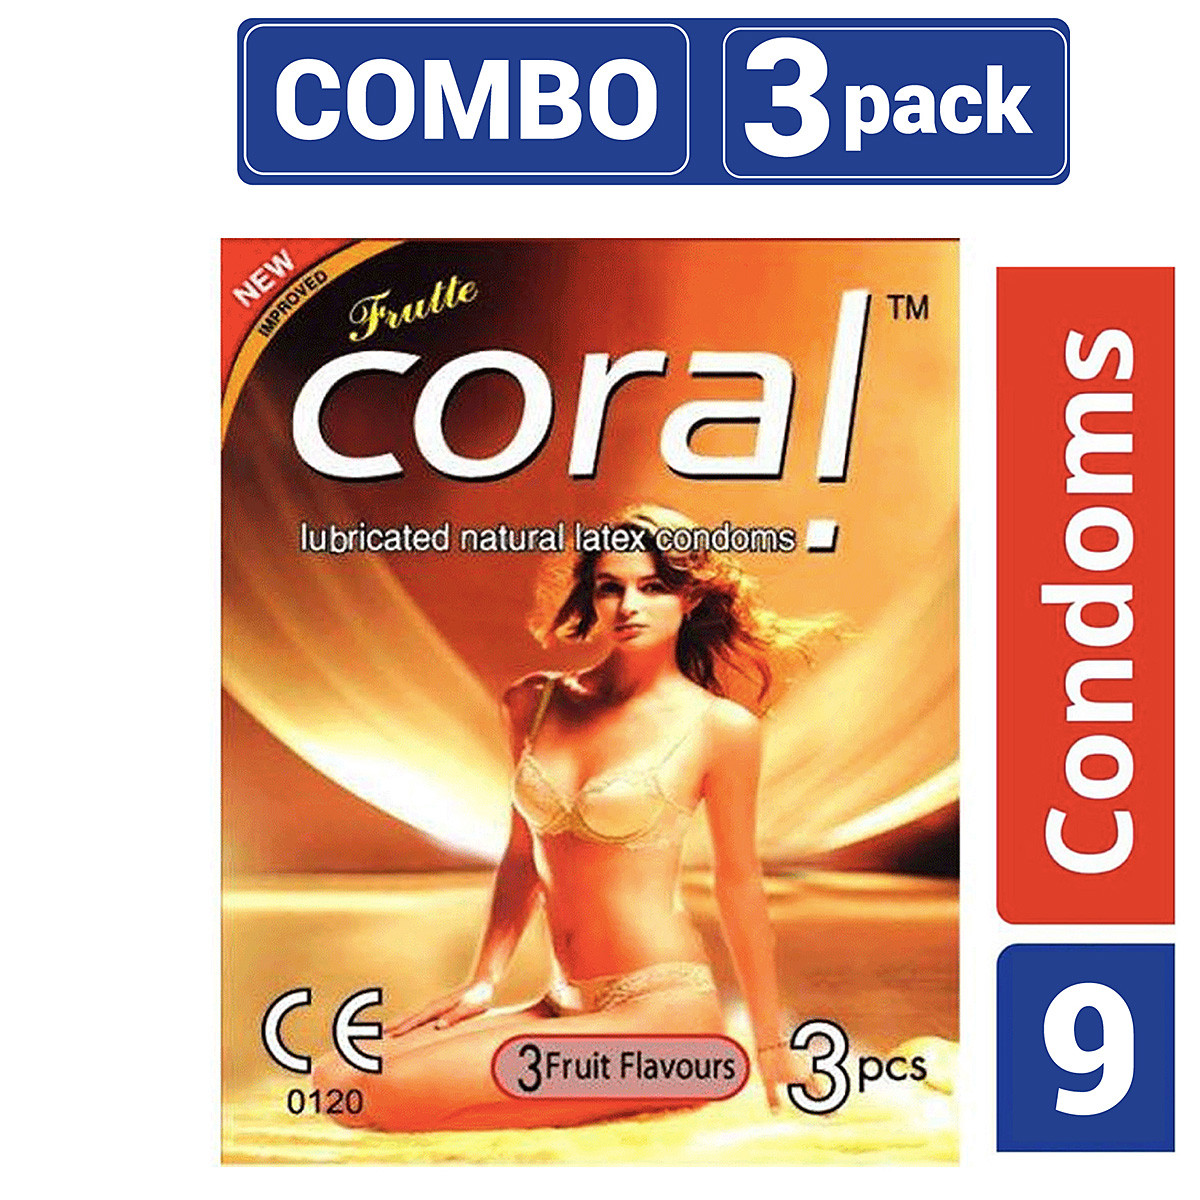 Coral 3 Fruits Flavors Lubricated Natural Latex Condoms 3 Pack Combo - 9 Pcs - Condoms